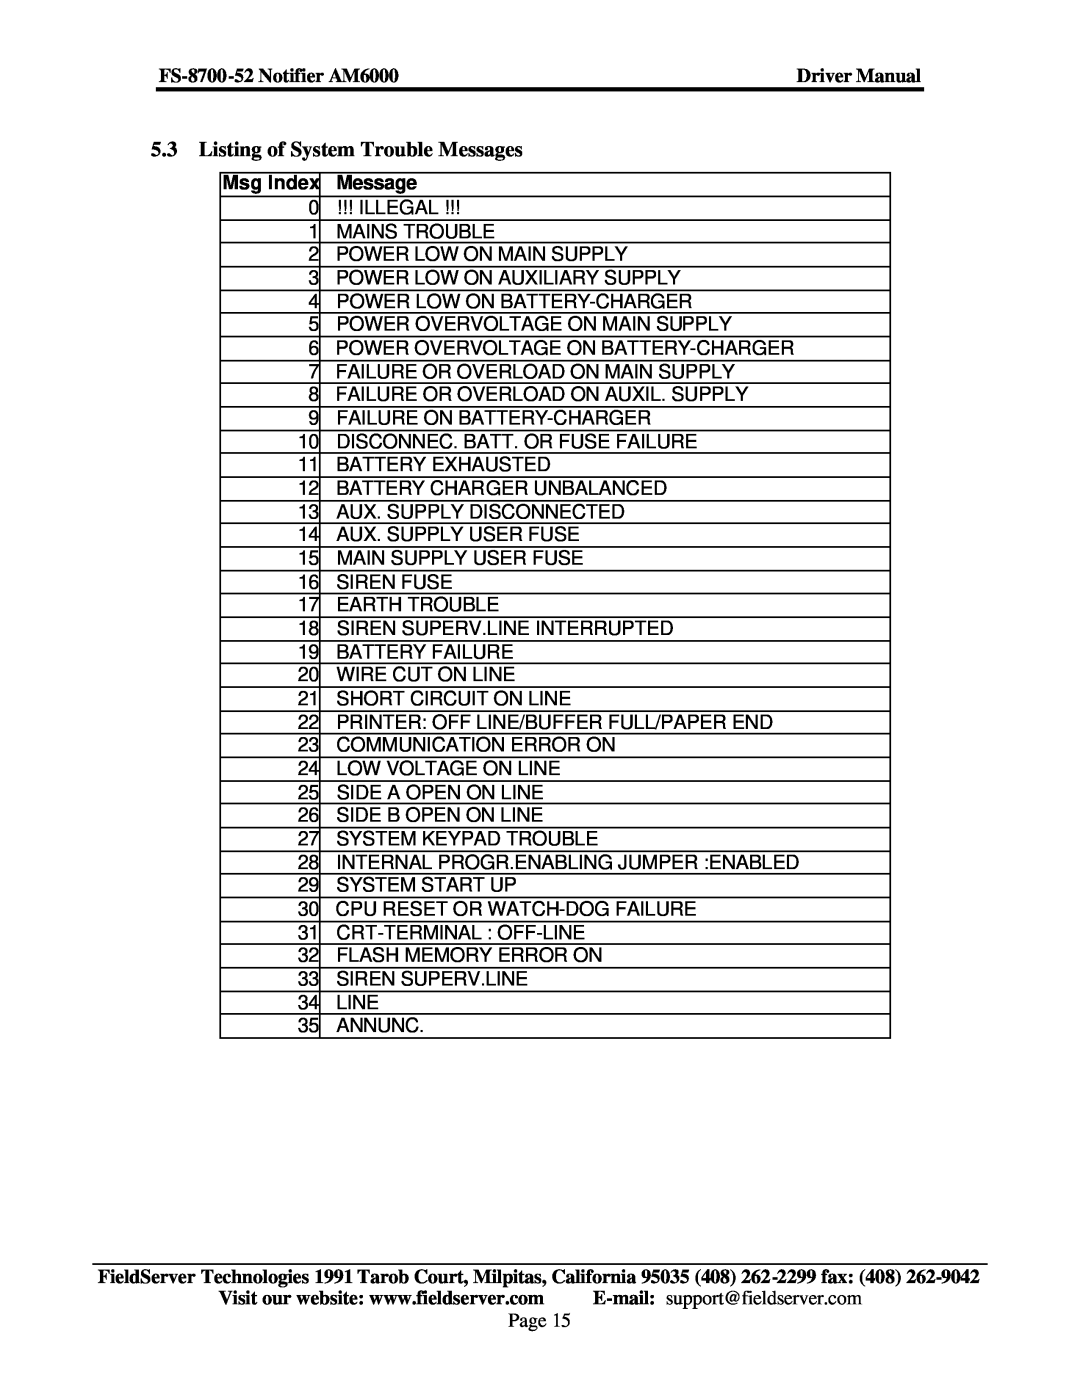 FieldServer instruction manual Listing of System Trouble Messages, FS-8700-52 Notifier AM6000, Driver Manual 